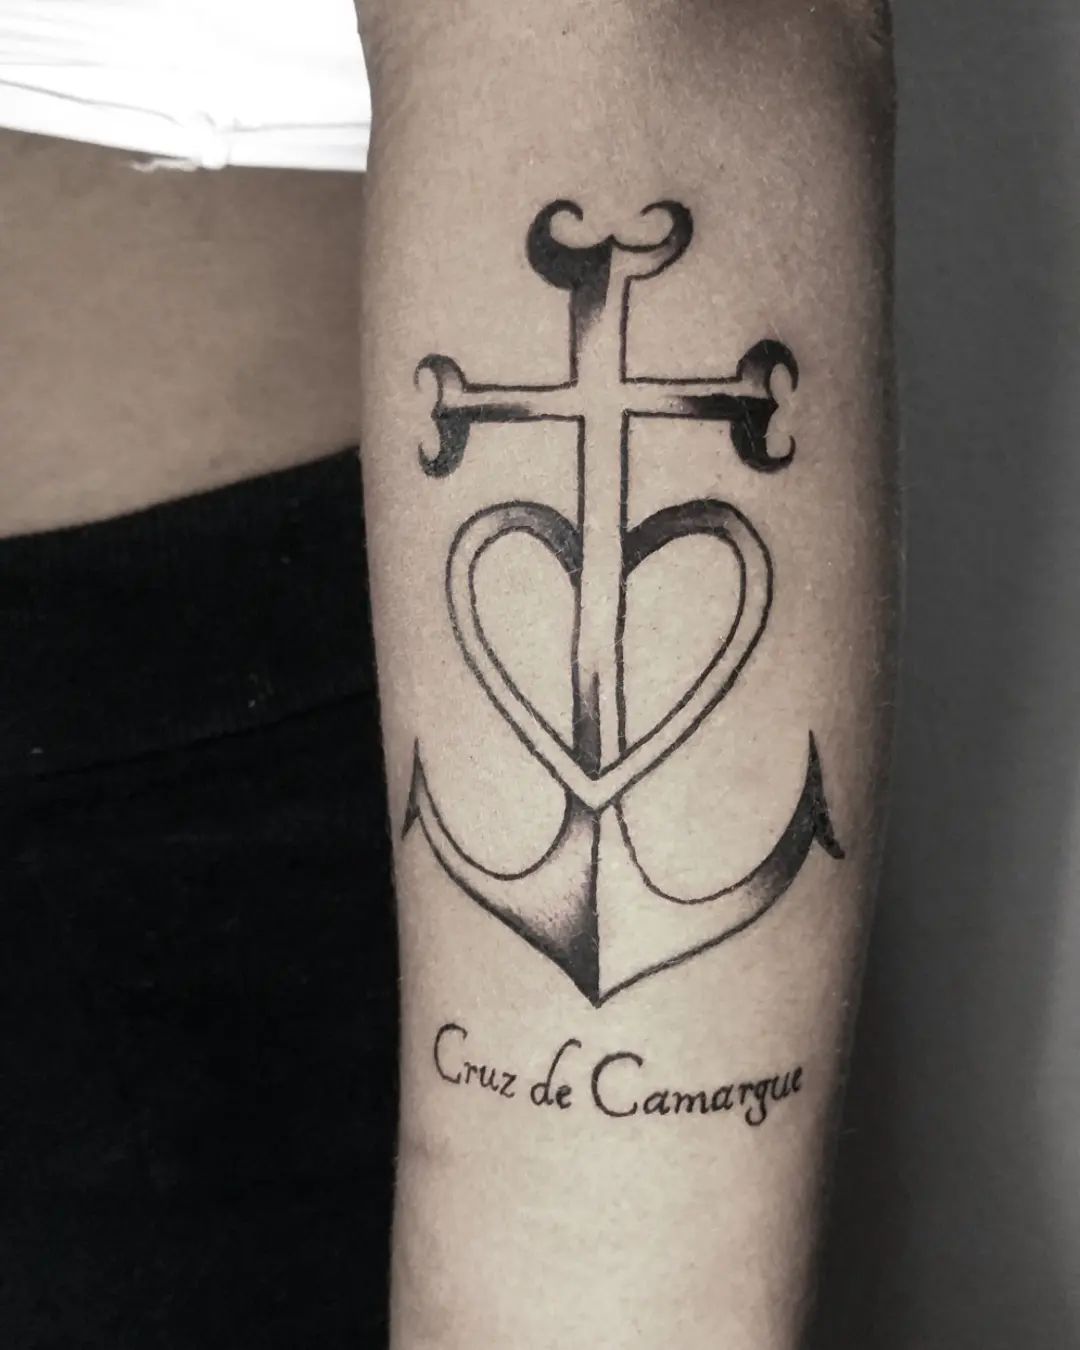 Cross of Camargue is a symbol which is created with an anchor and a cross. It represents the most important three values of humanity, which are hope, faith and love. These powerful meanings it carries make this symbol great. Let's cover your arm with it.